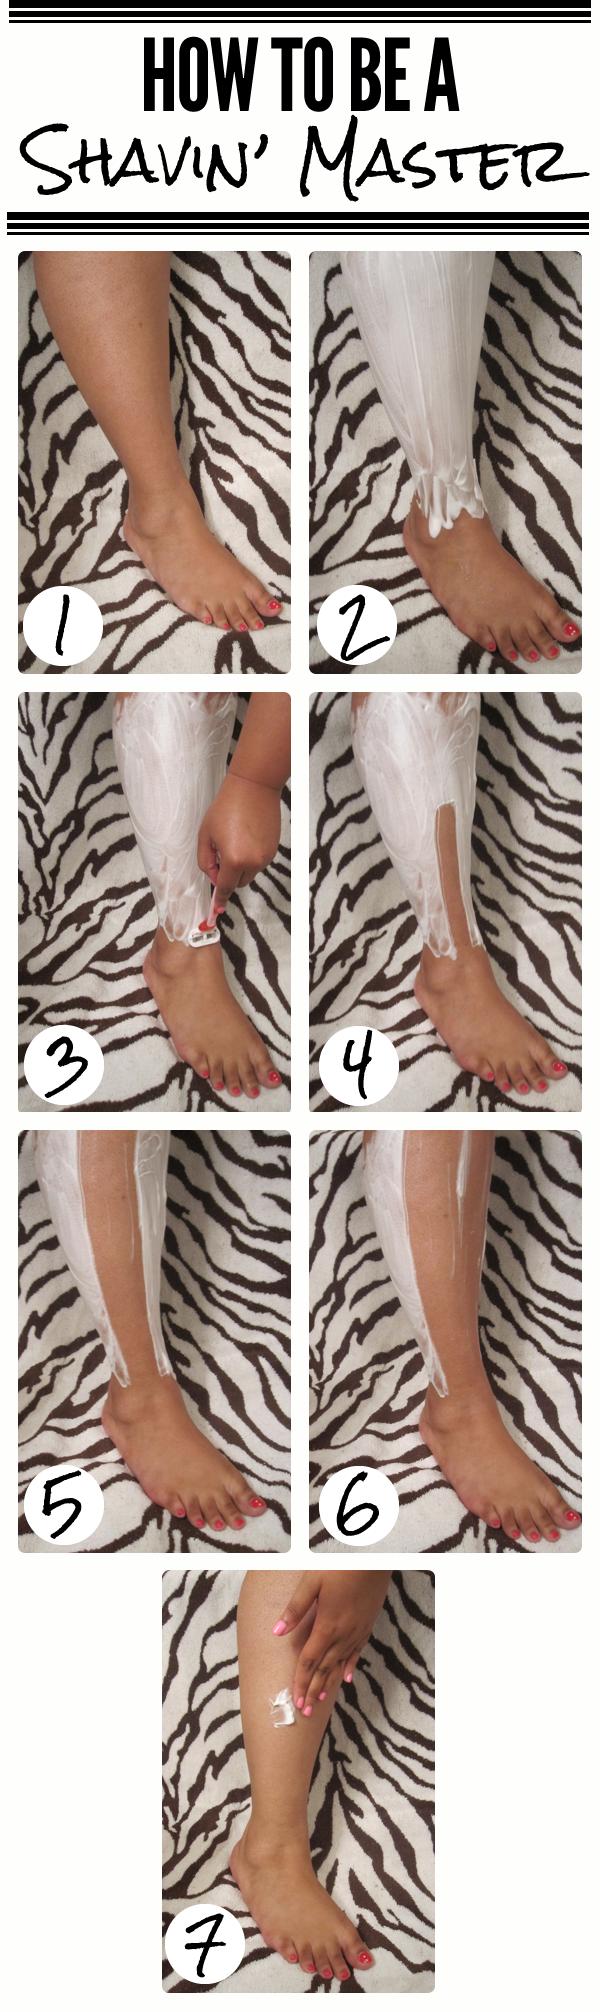 A Step-by-Step Guide to Shaving Your Legs Correctly 